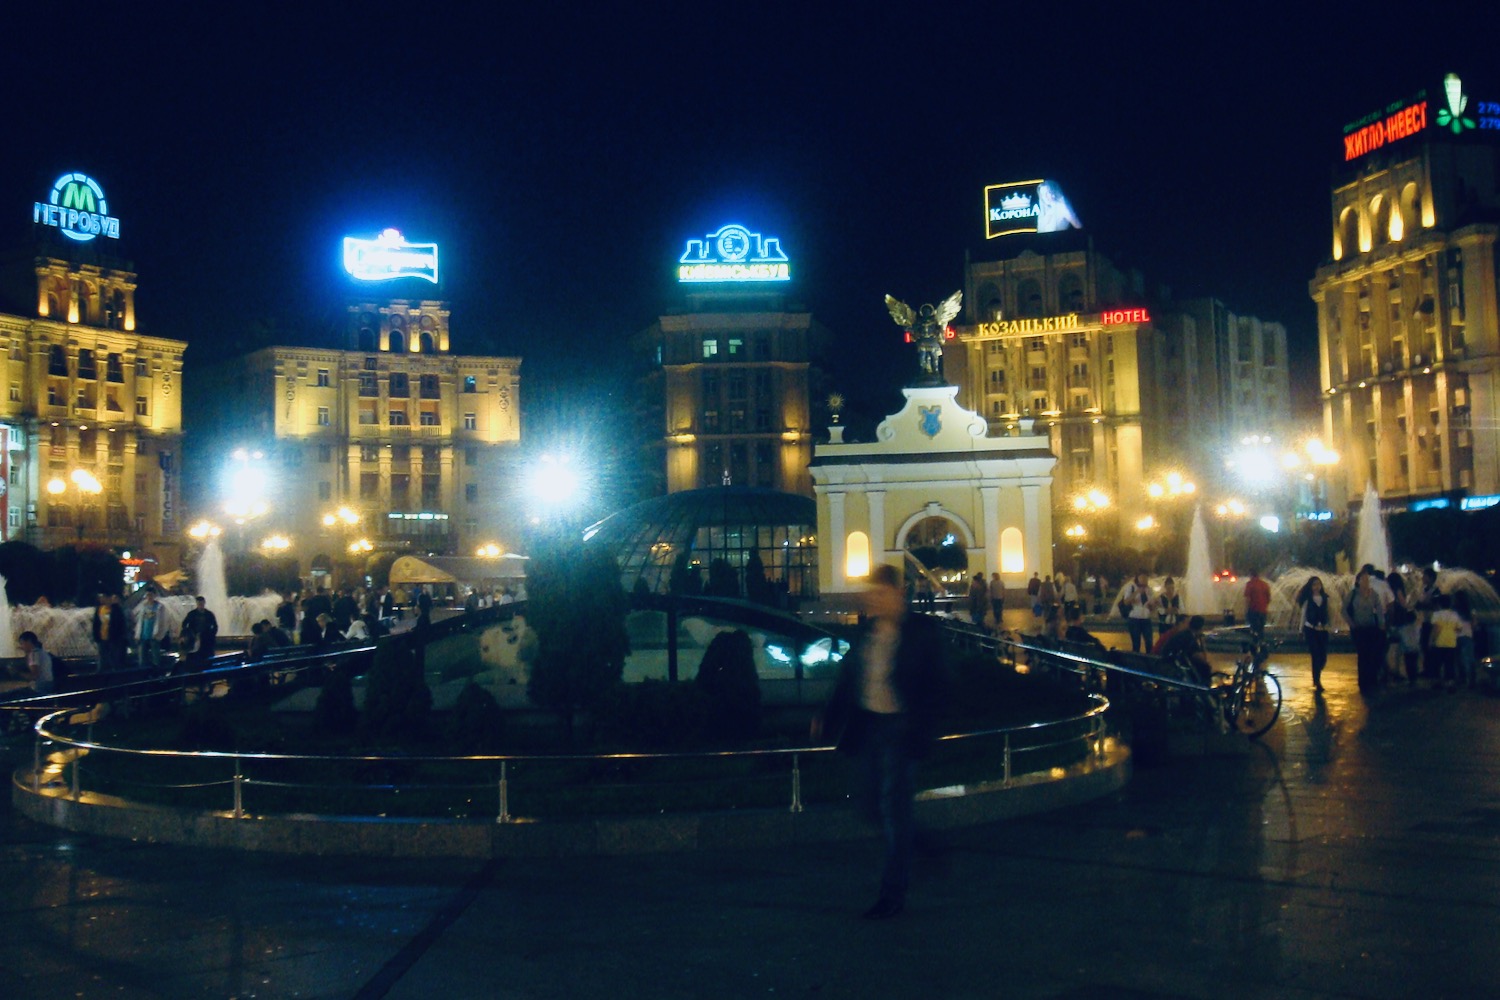 a group of people walking in a plaza with buildings and a fountain